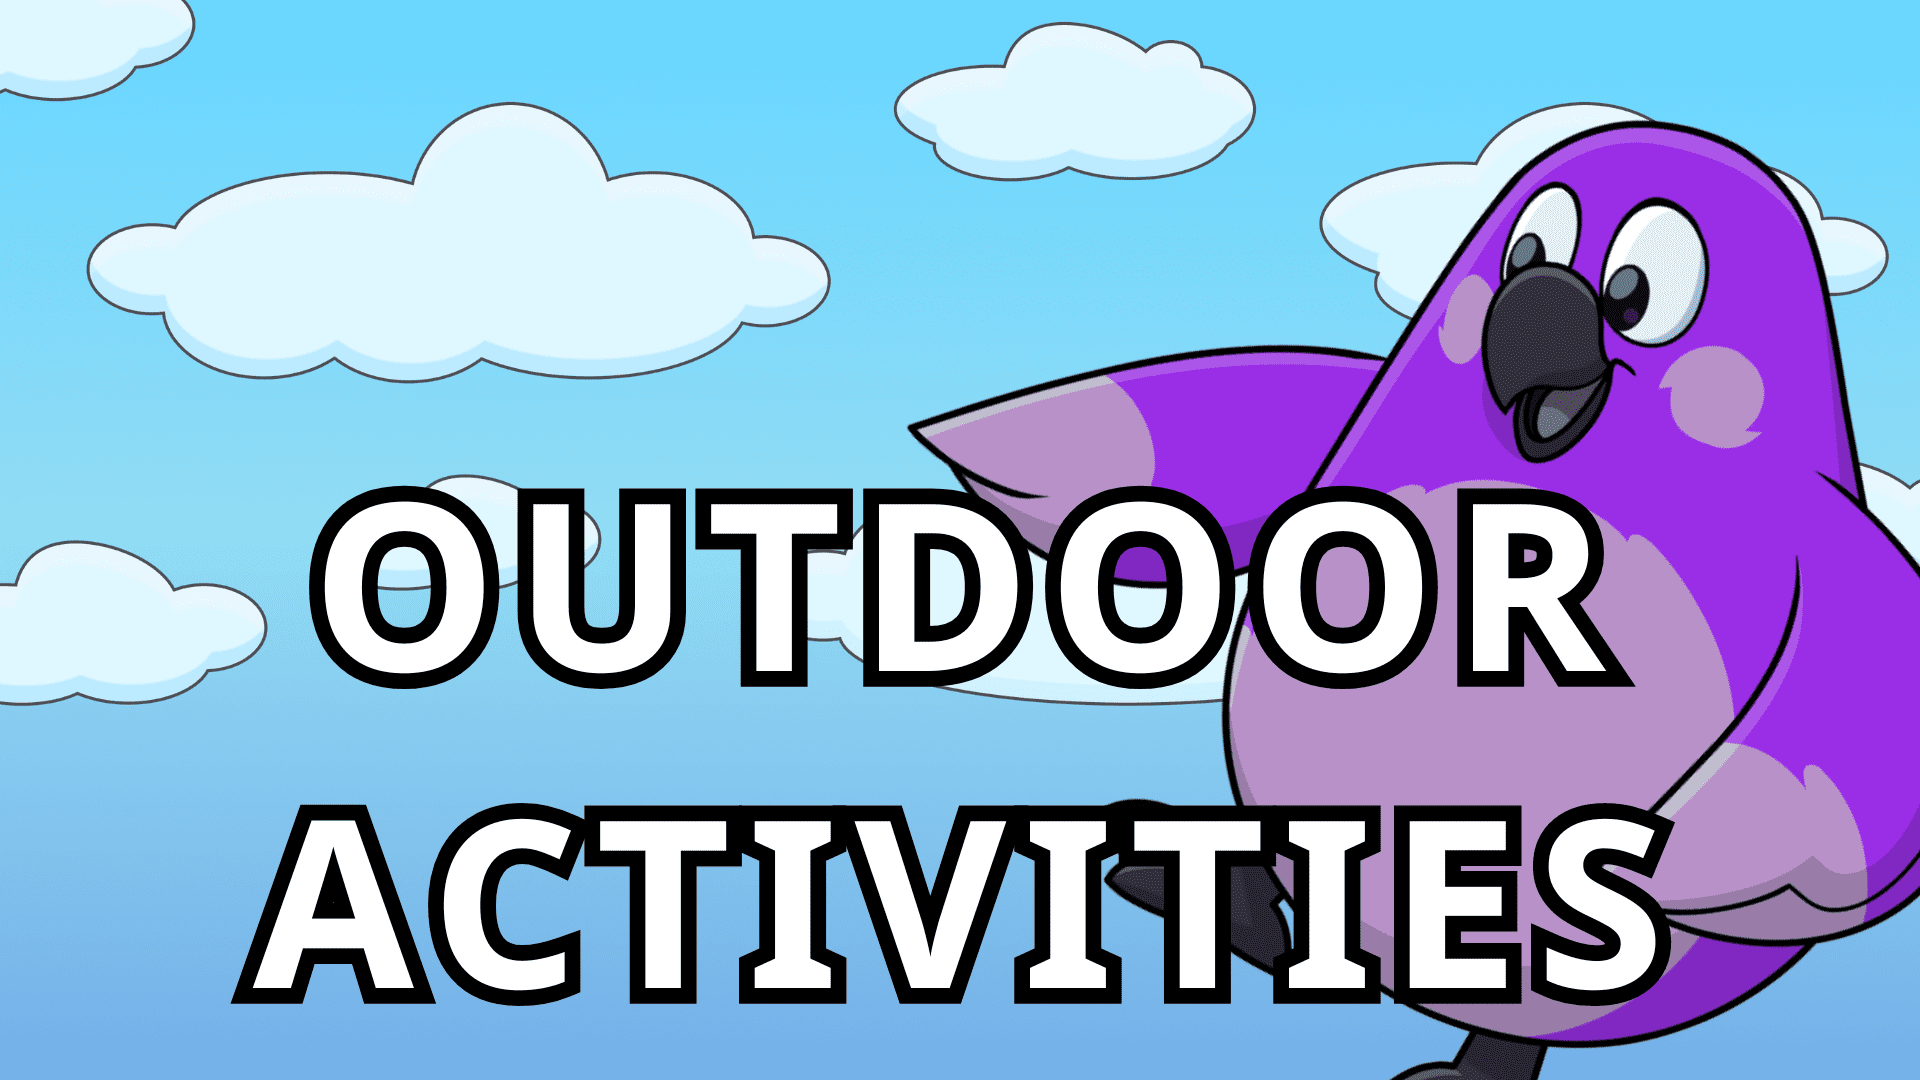 A purple parrot is holding the text "Outdoor activities" against a light blue sky with puffy clouds. This portrays our simple outdoor games for kids.